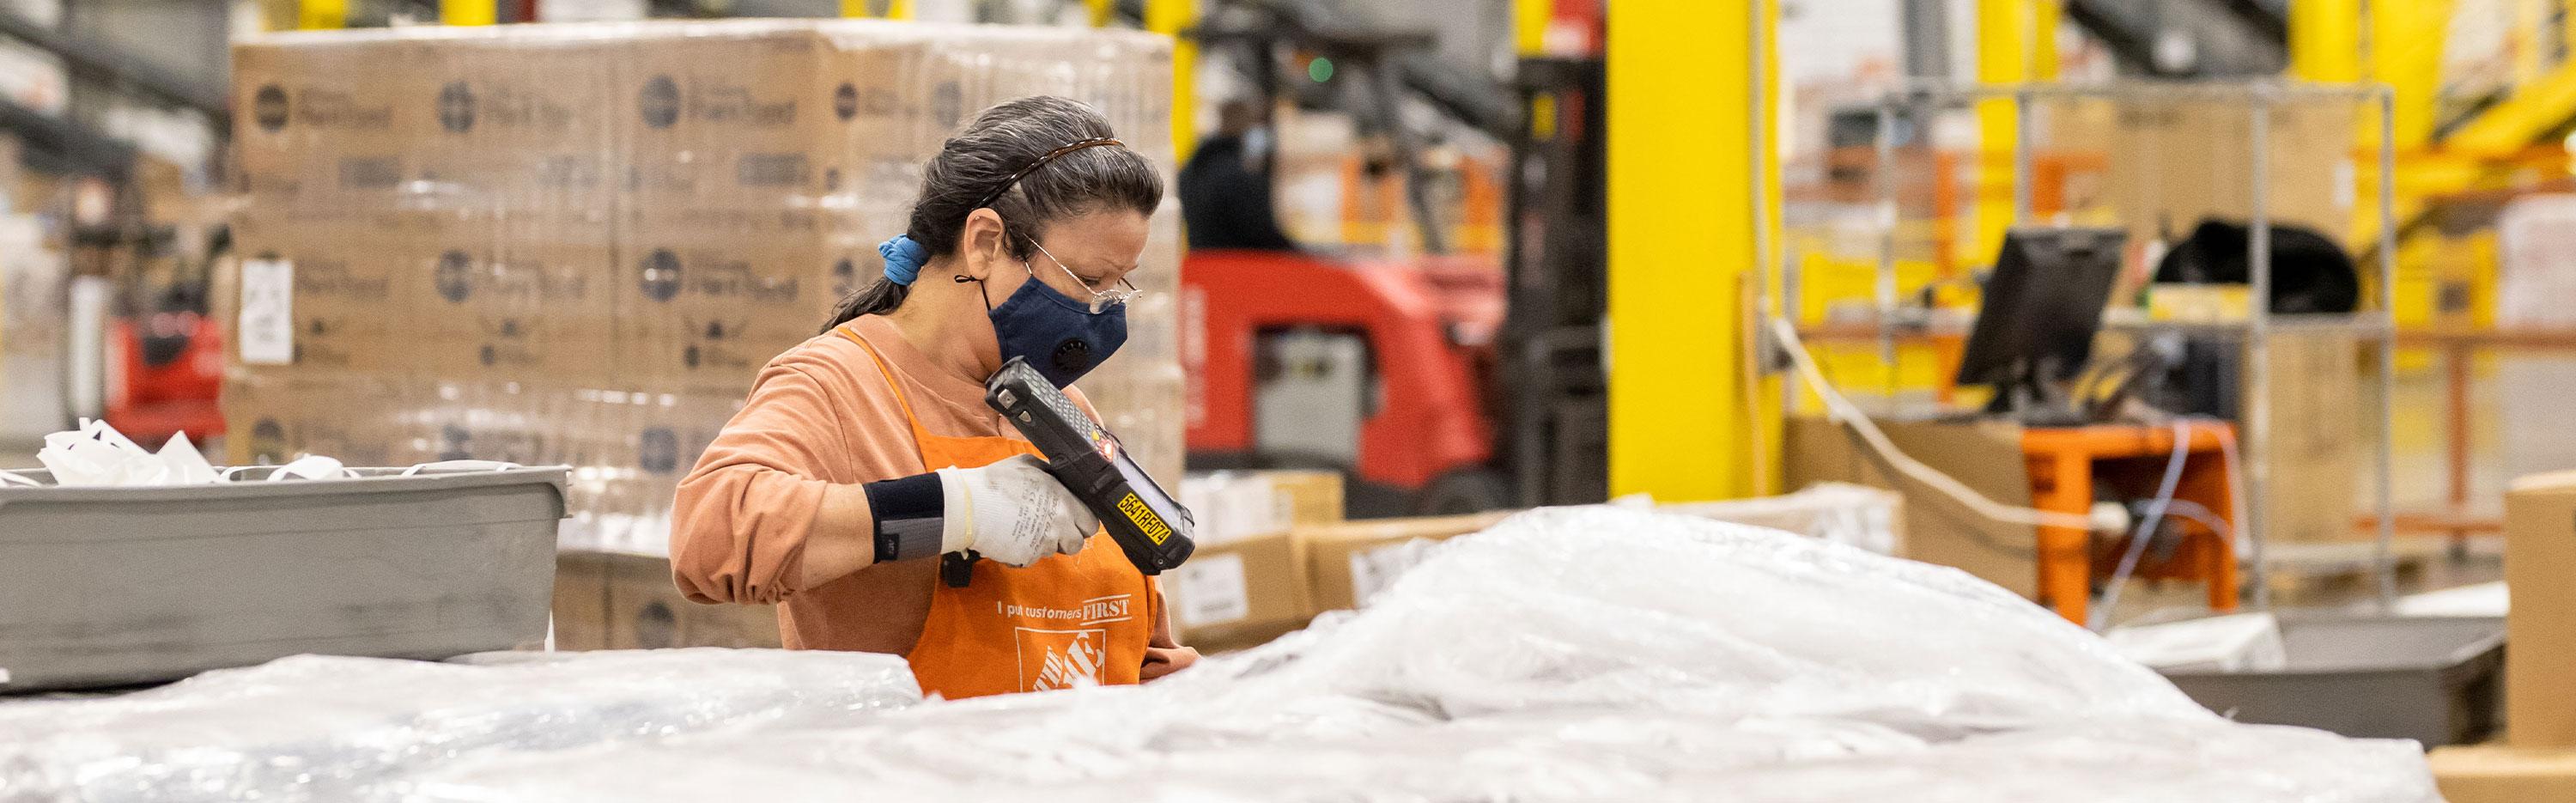 age to work at home depot in florida